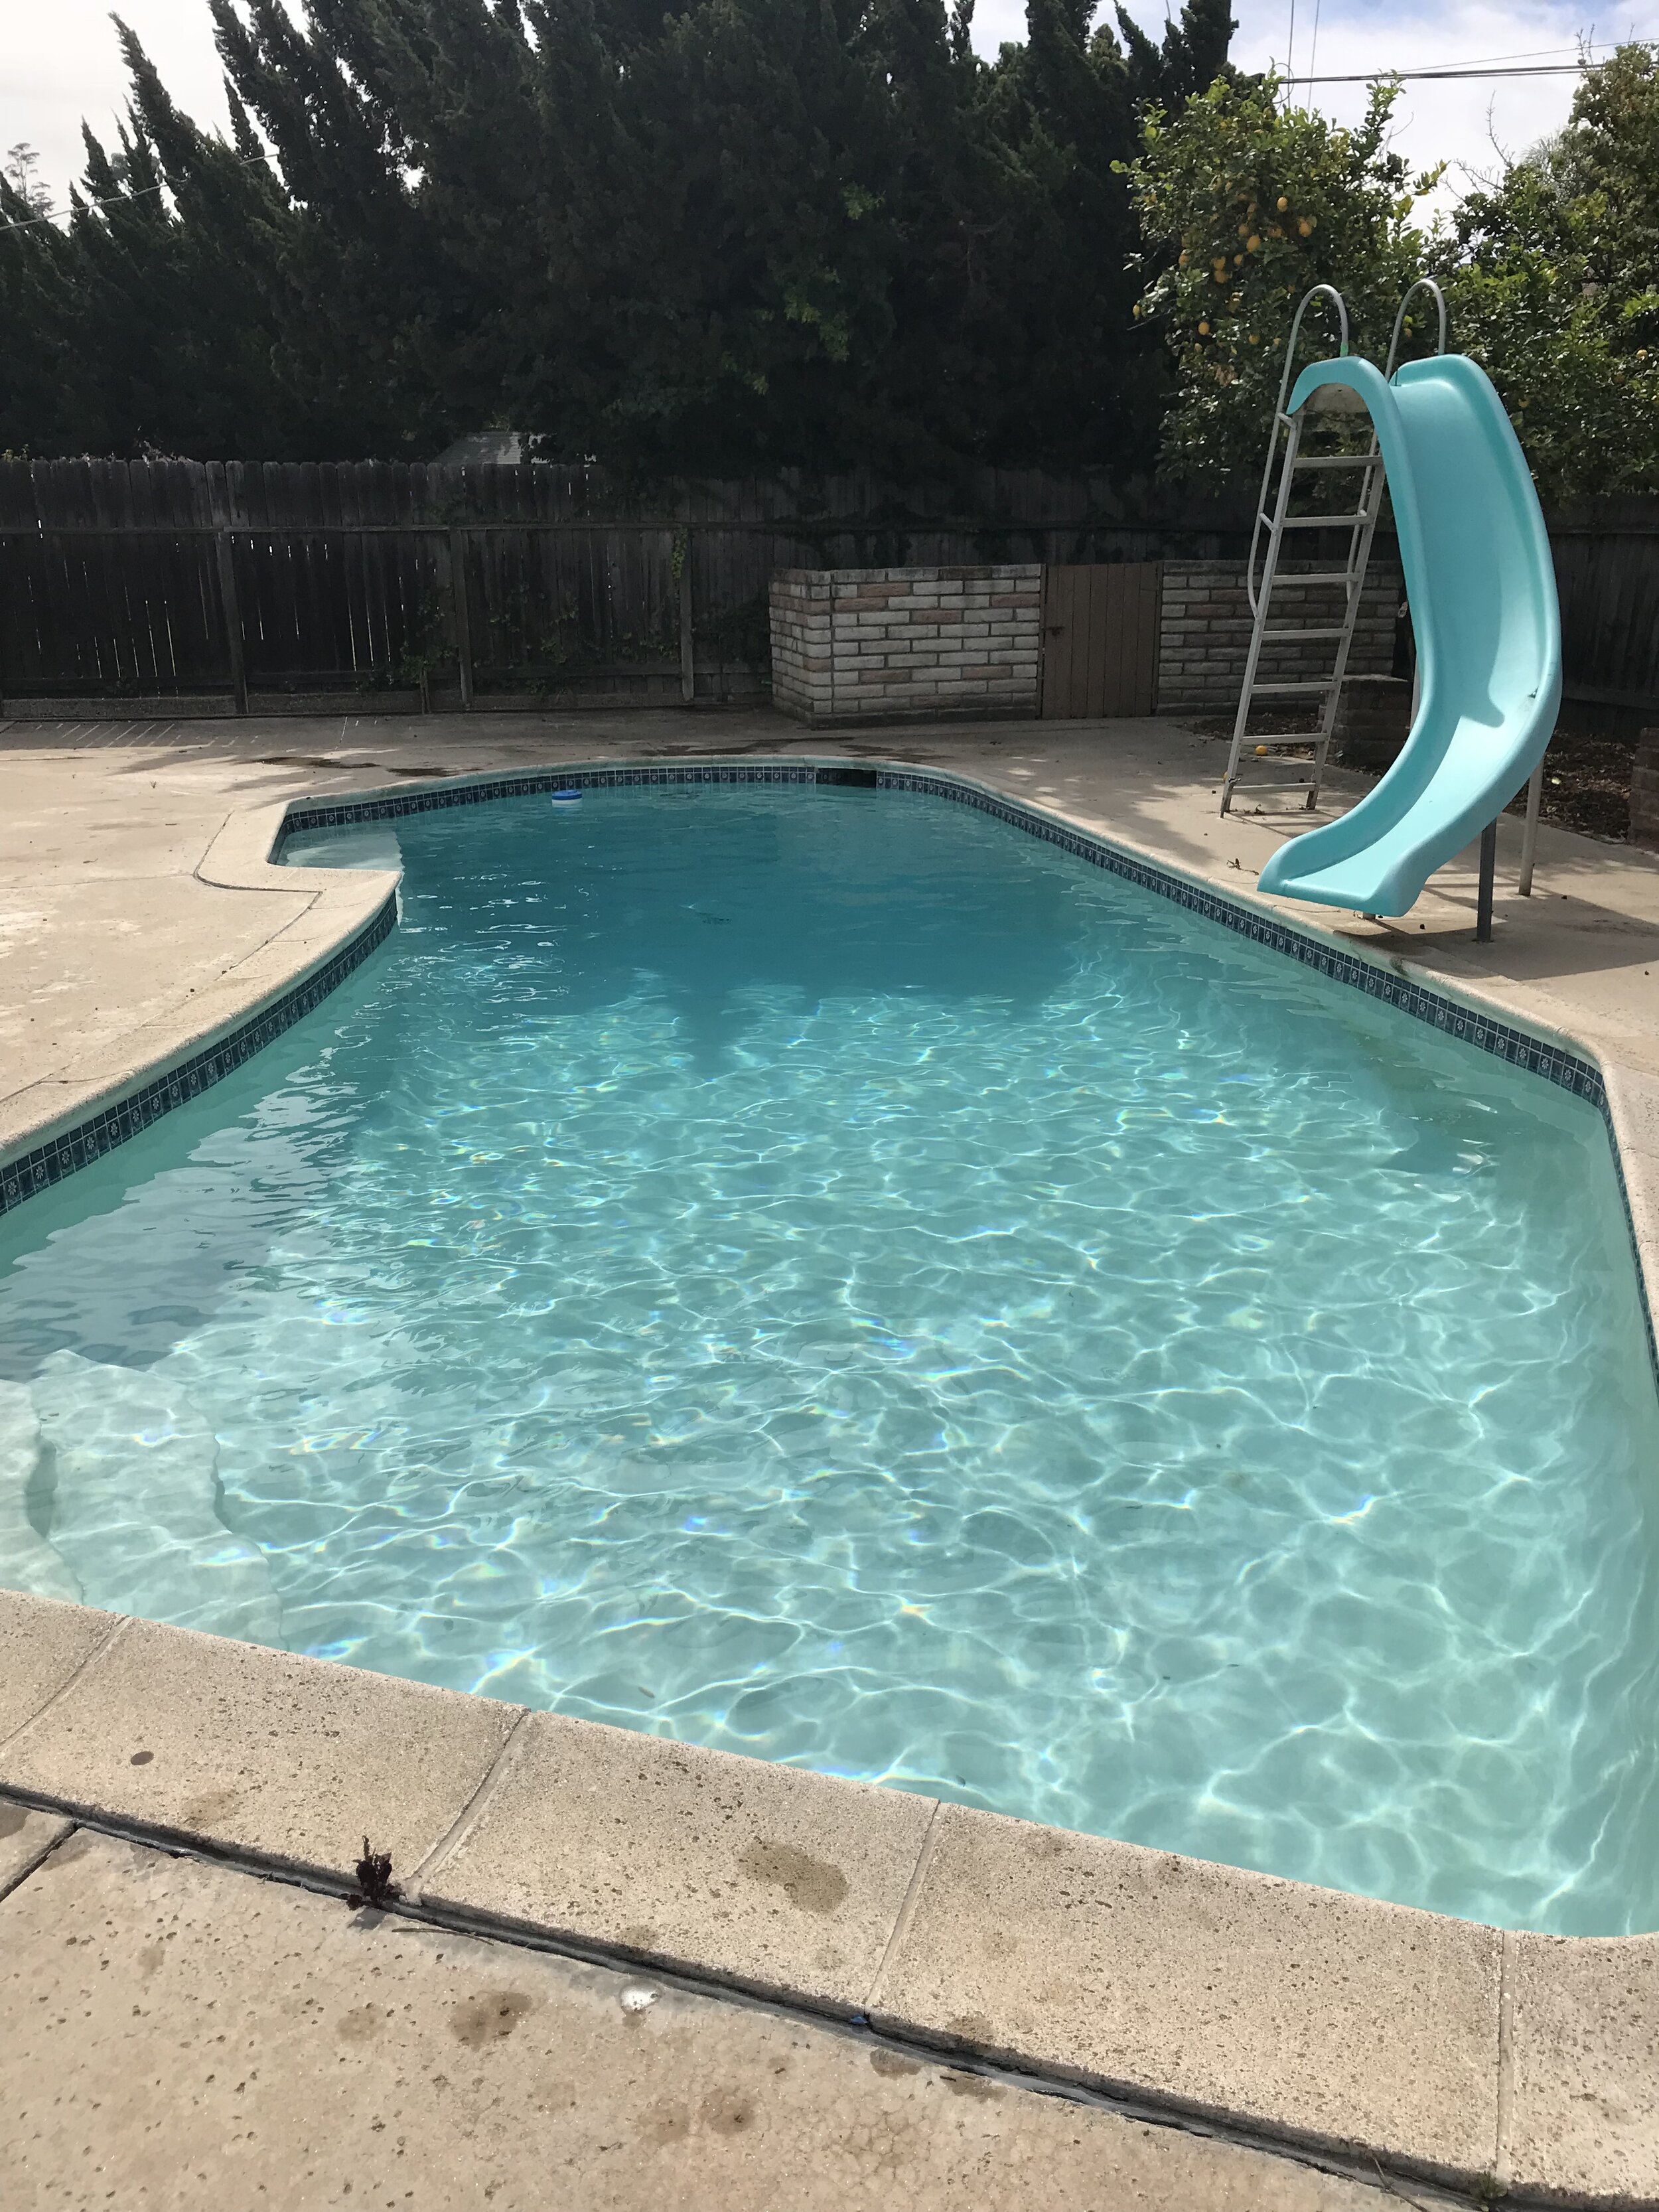 Pool And Spa Cleaning Fresno Ca